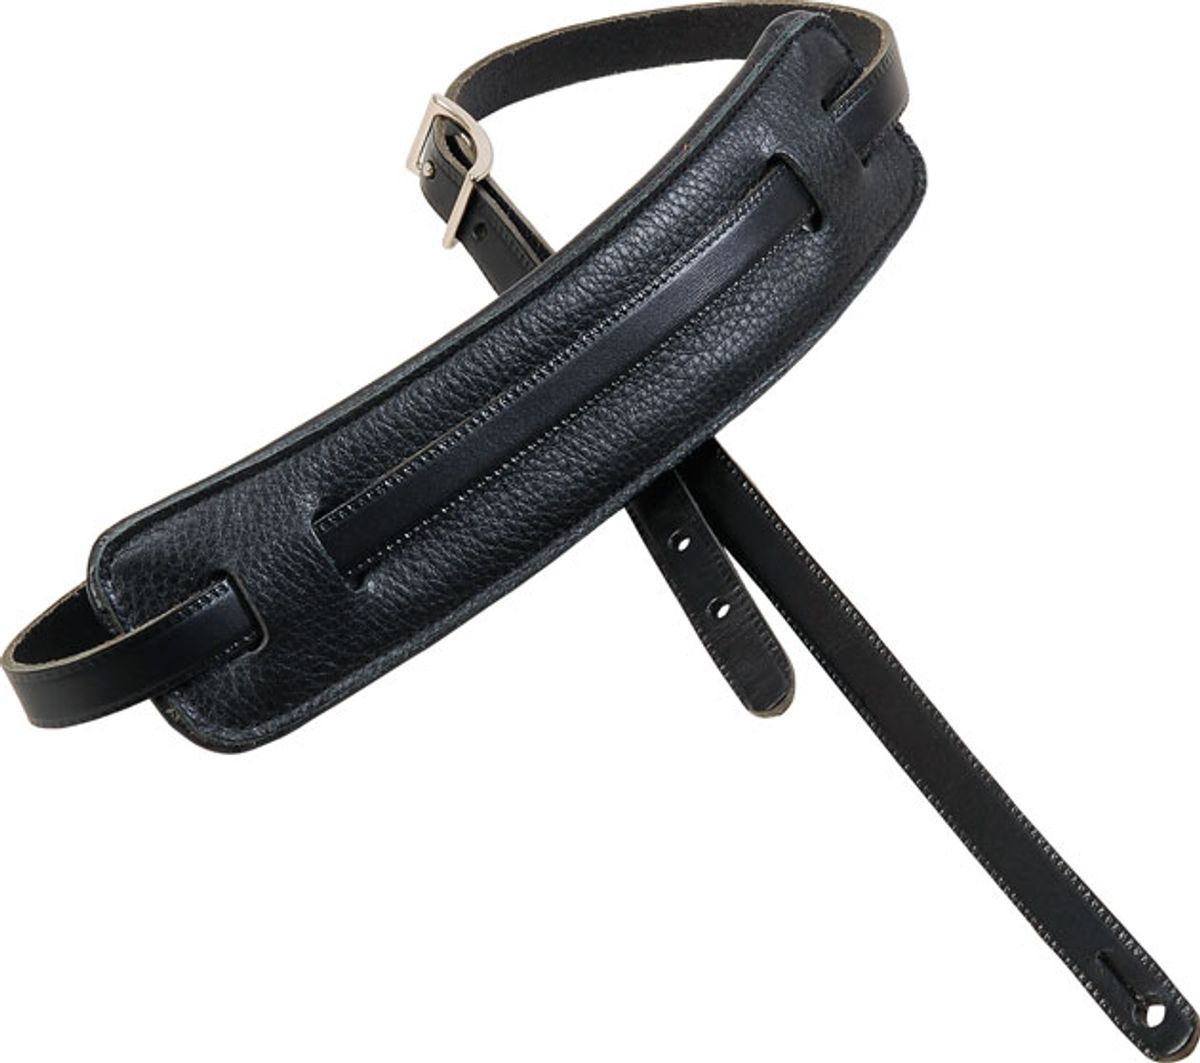 Levy's Leathers Announce MG25 Strap